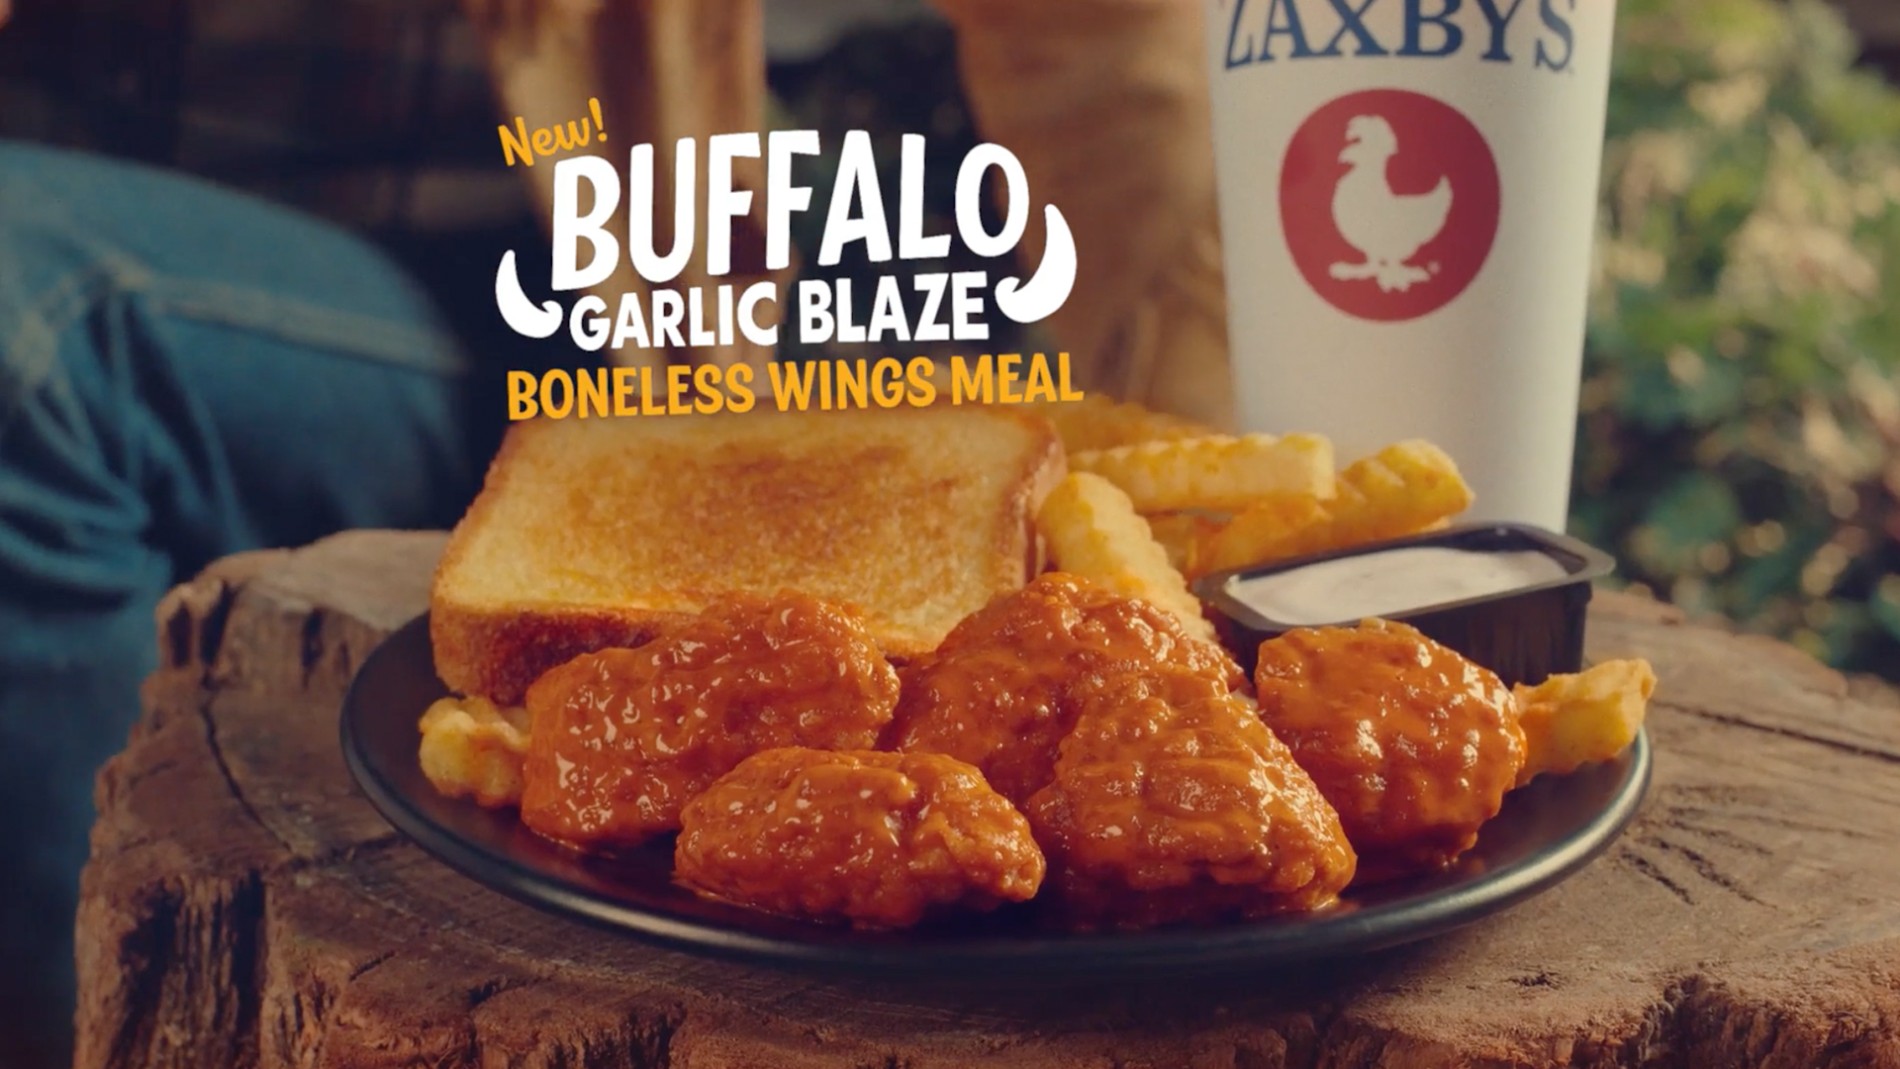 Zaxby’s new Buffalo Garlic Blaze signature sauce complements the long-time favorite Boneless Wings Meal, which comes with five boneless wings, tossed in the new Buffalo Garlic Blaze sauce served with a side of ranch, Crinkle Fries, Texas Toast and a Coca-Cola Freestyle® drink beverage.